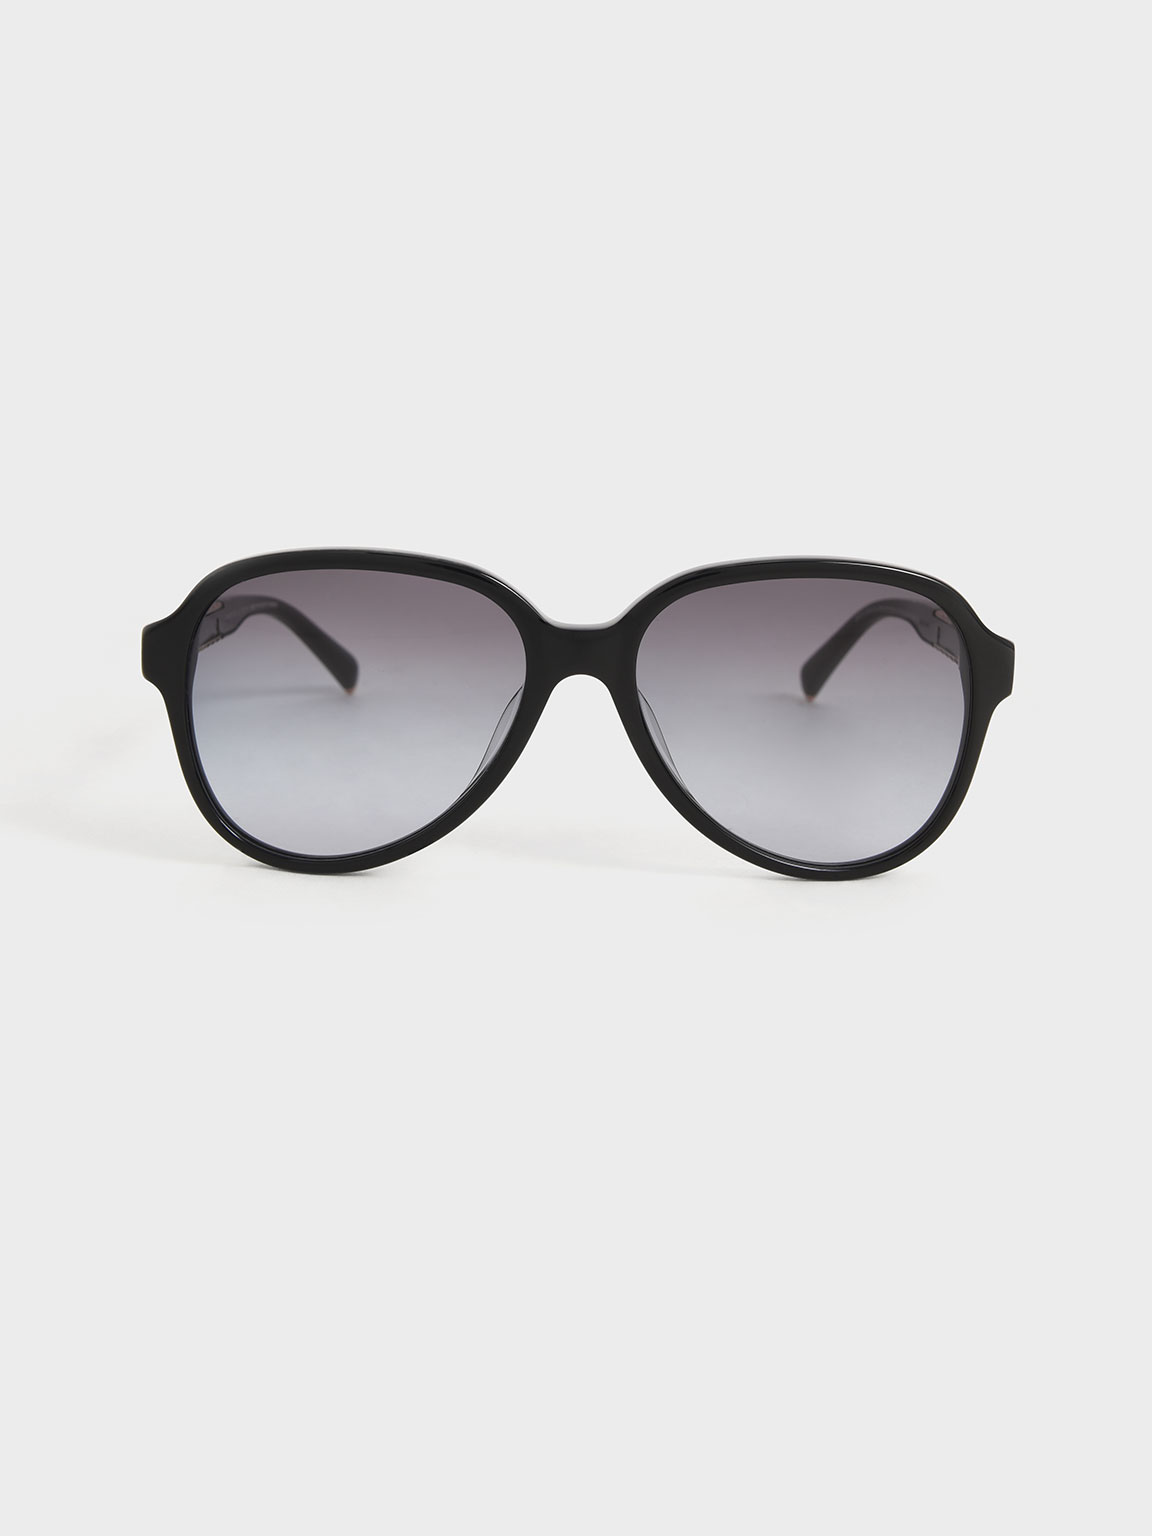 Charles & Keith Metallic Braided Temple Recycled Acetate Aviator Sunglasses In Black